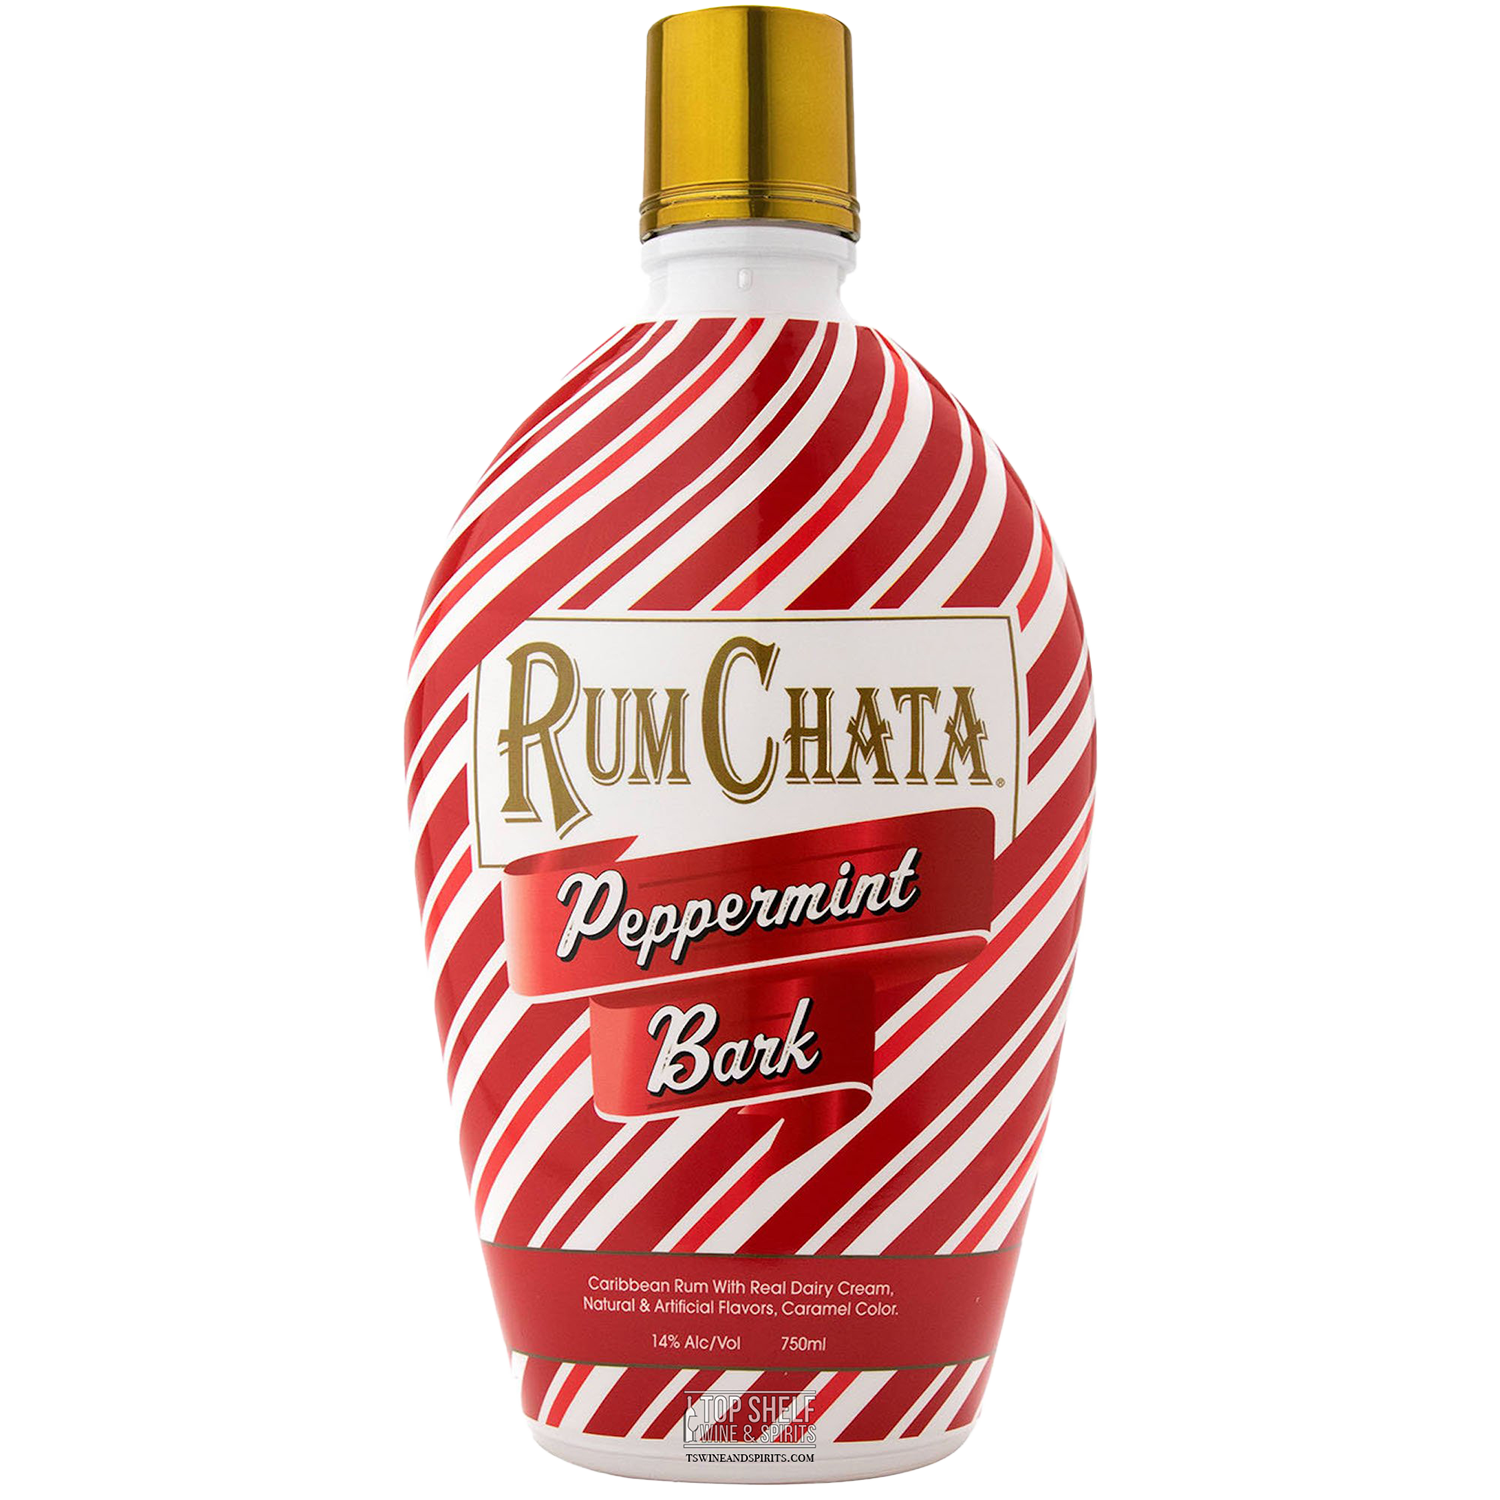 Rumchata Peppermint Bark (with real dairy cream)